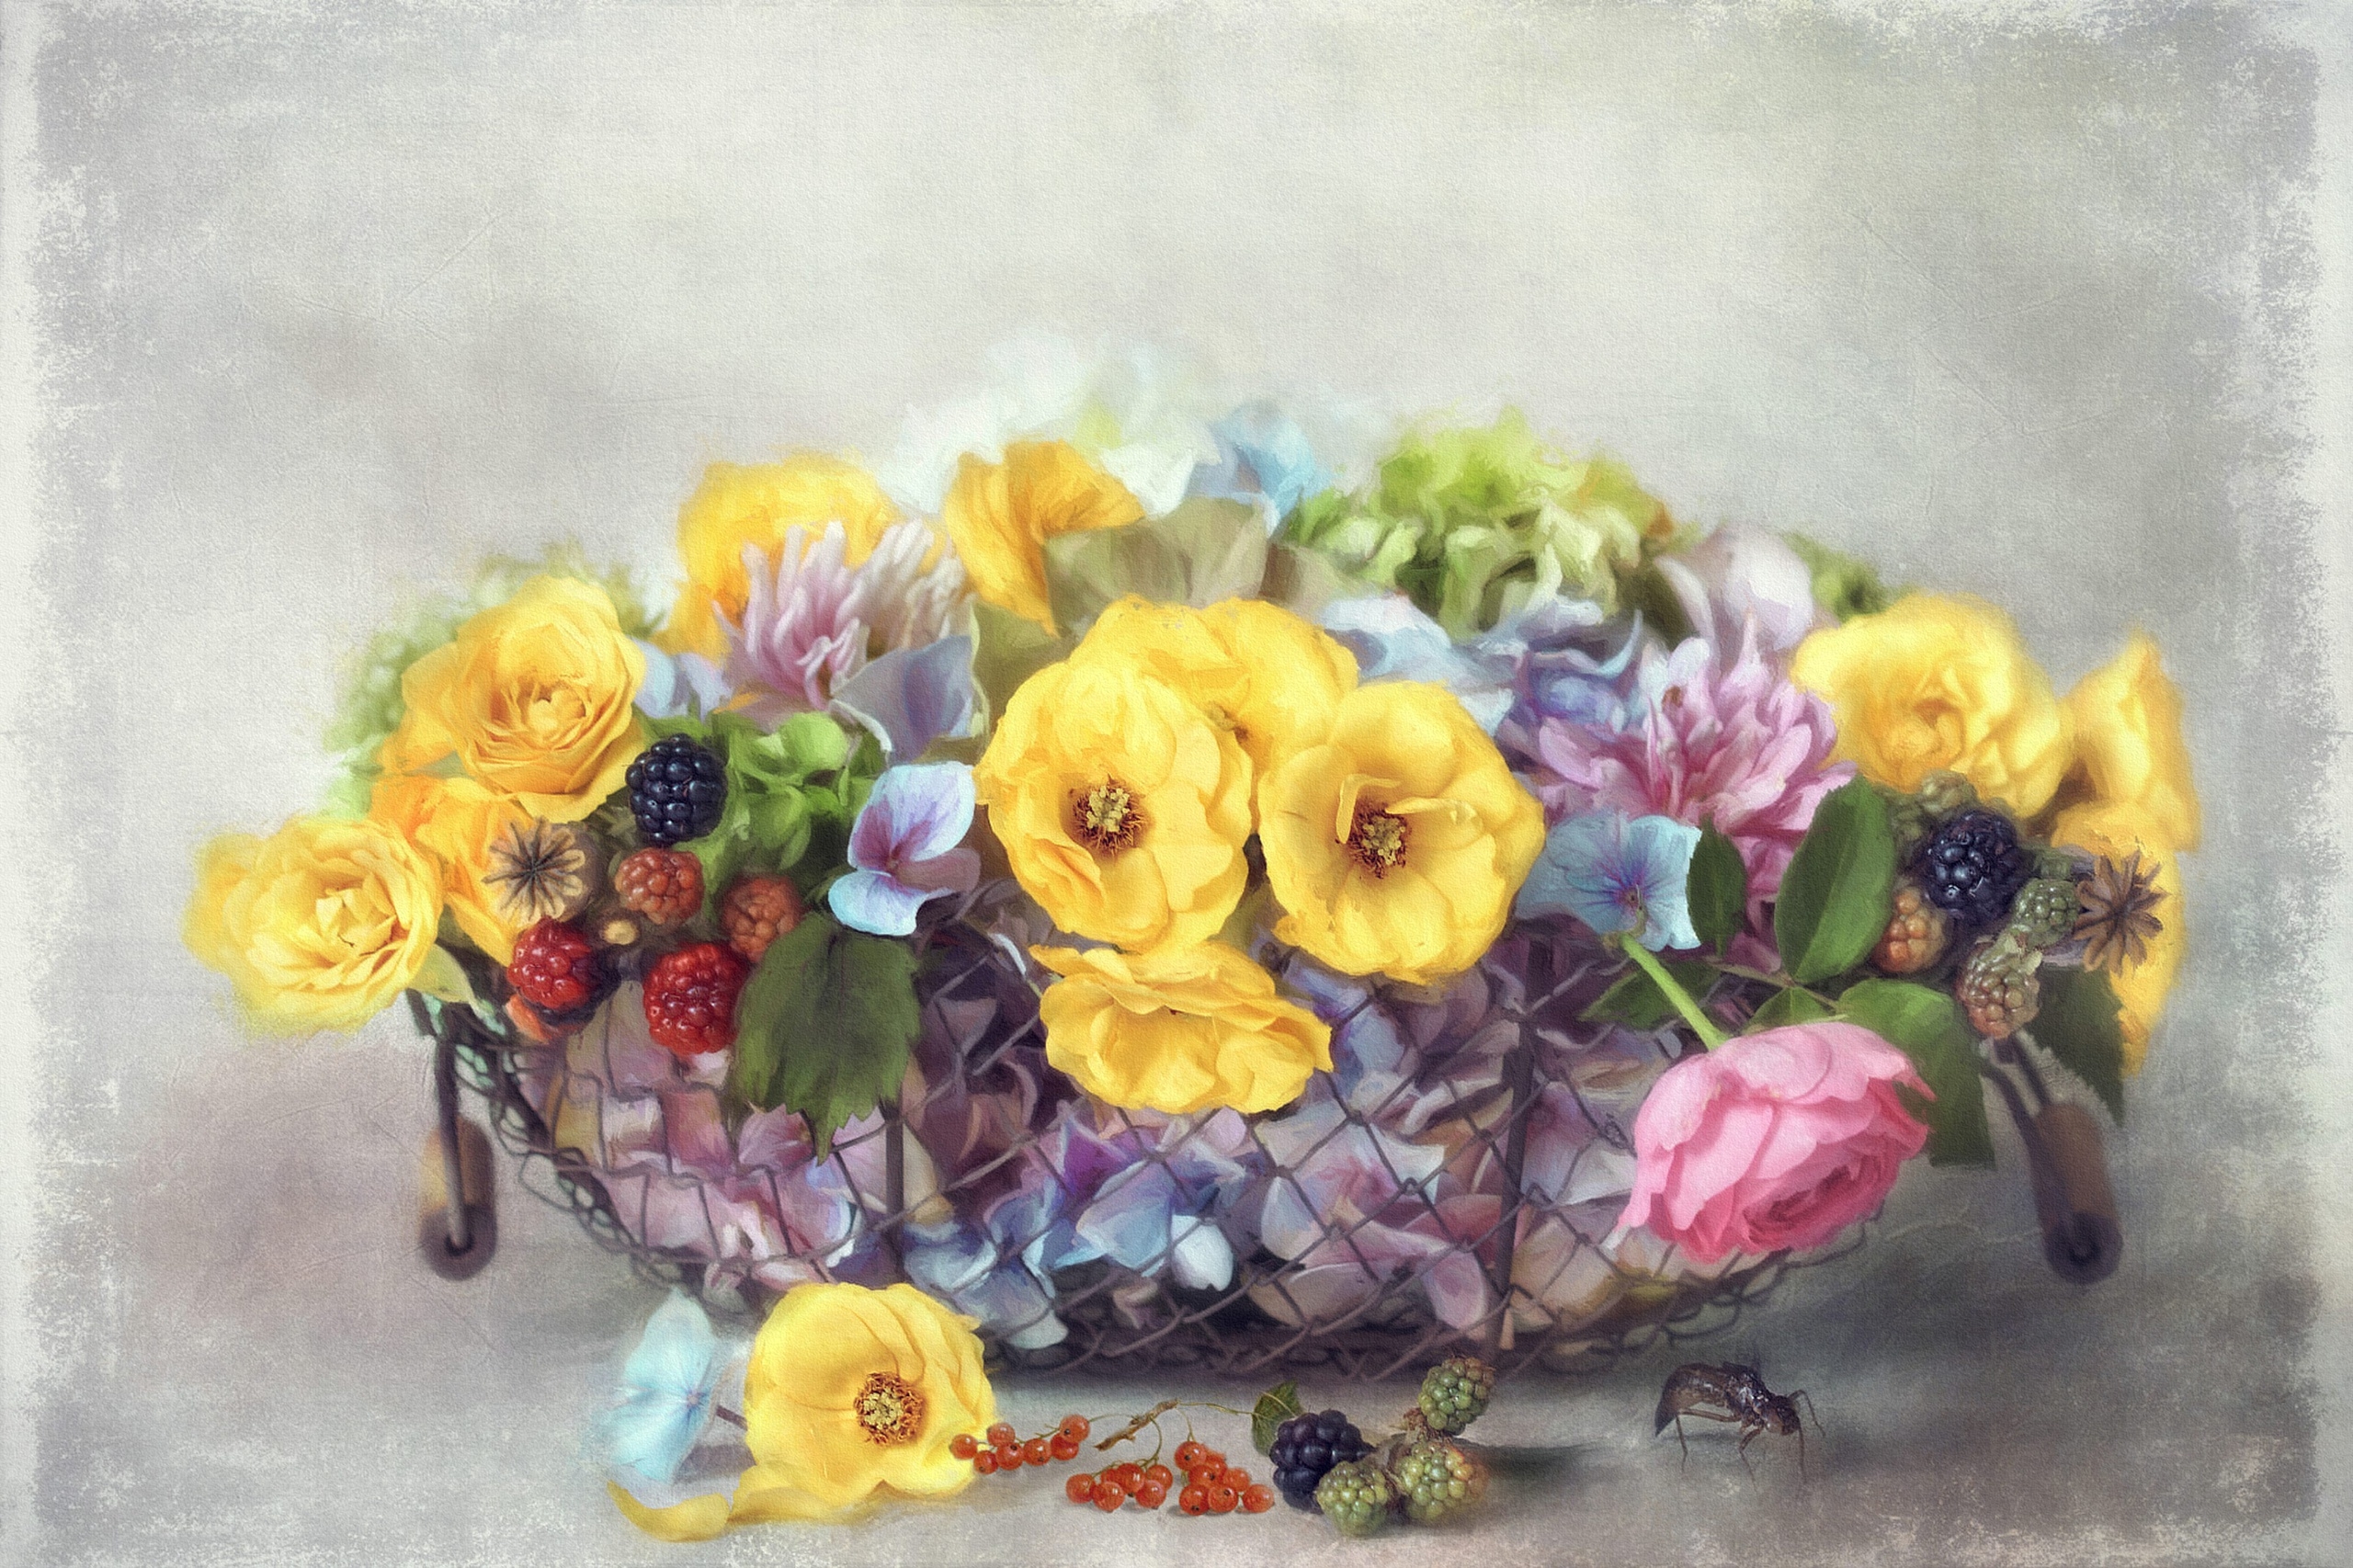 photography, still life, bowl, colorful, flower